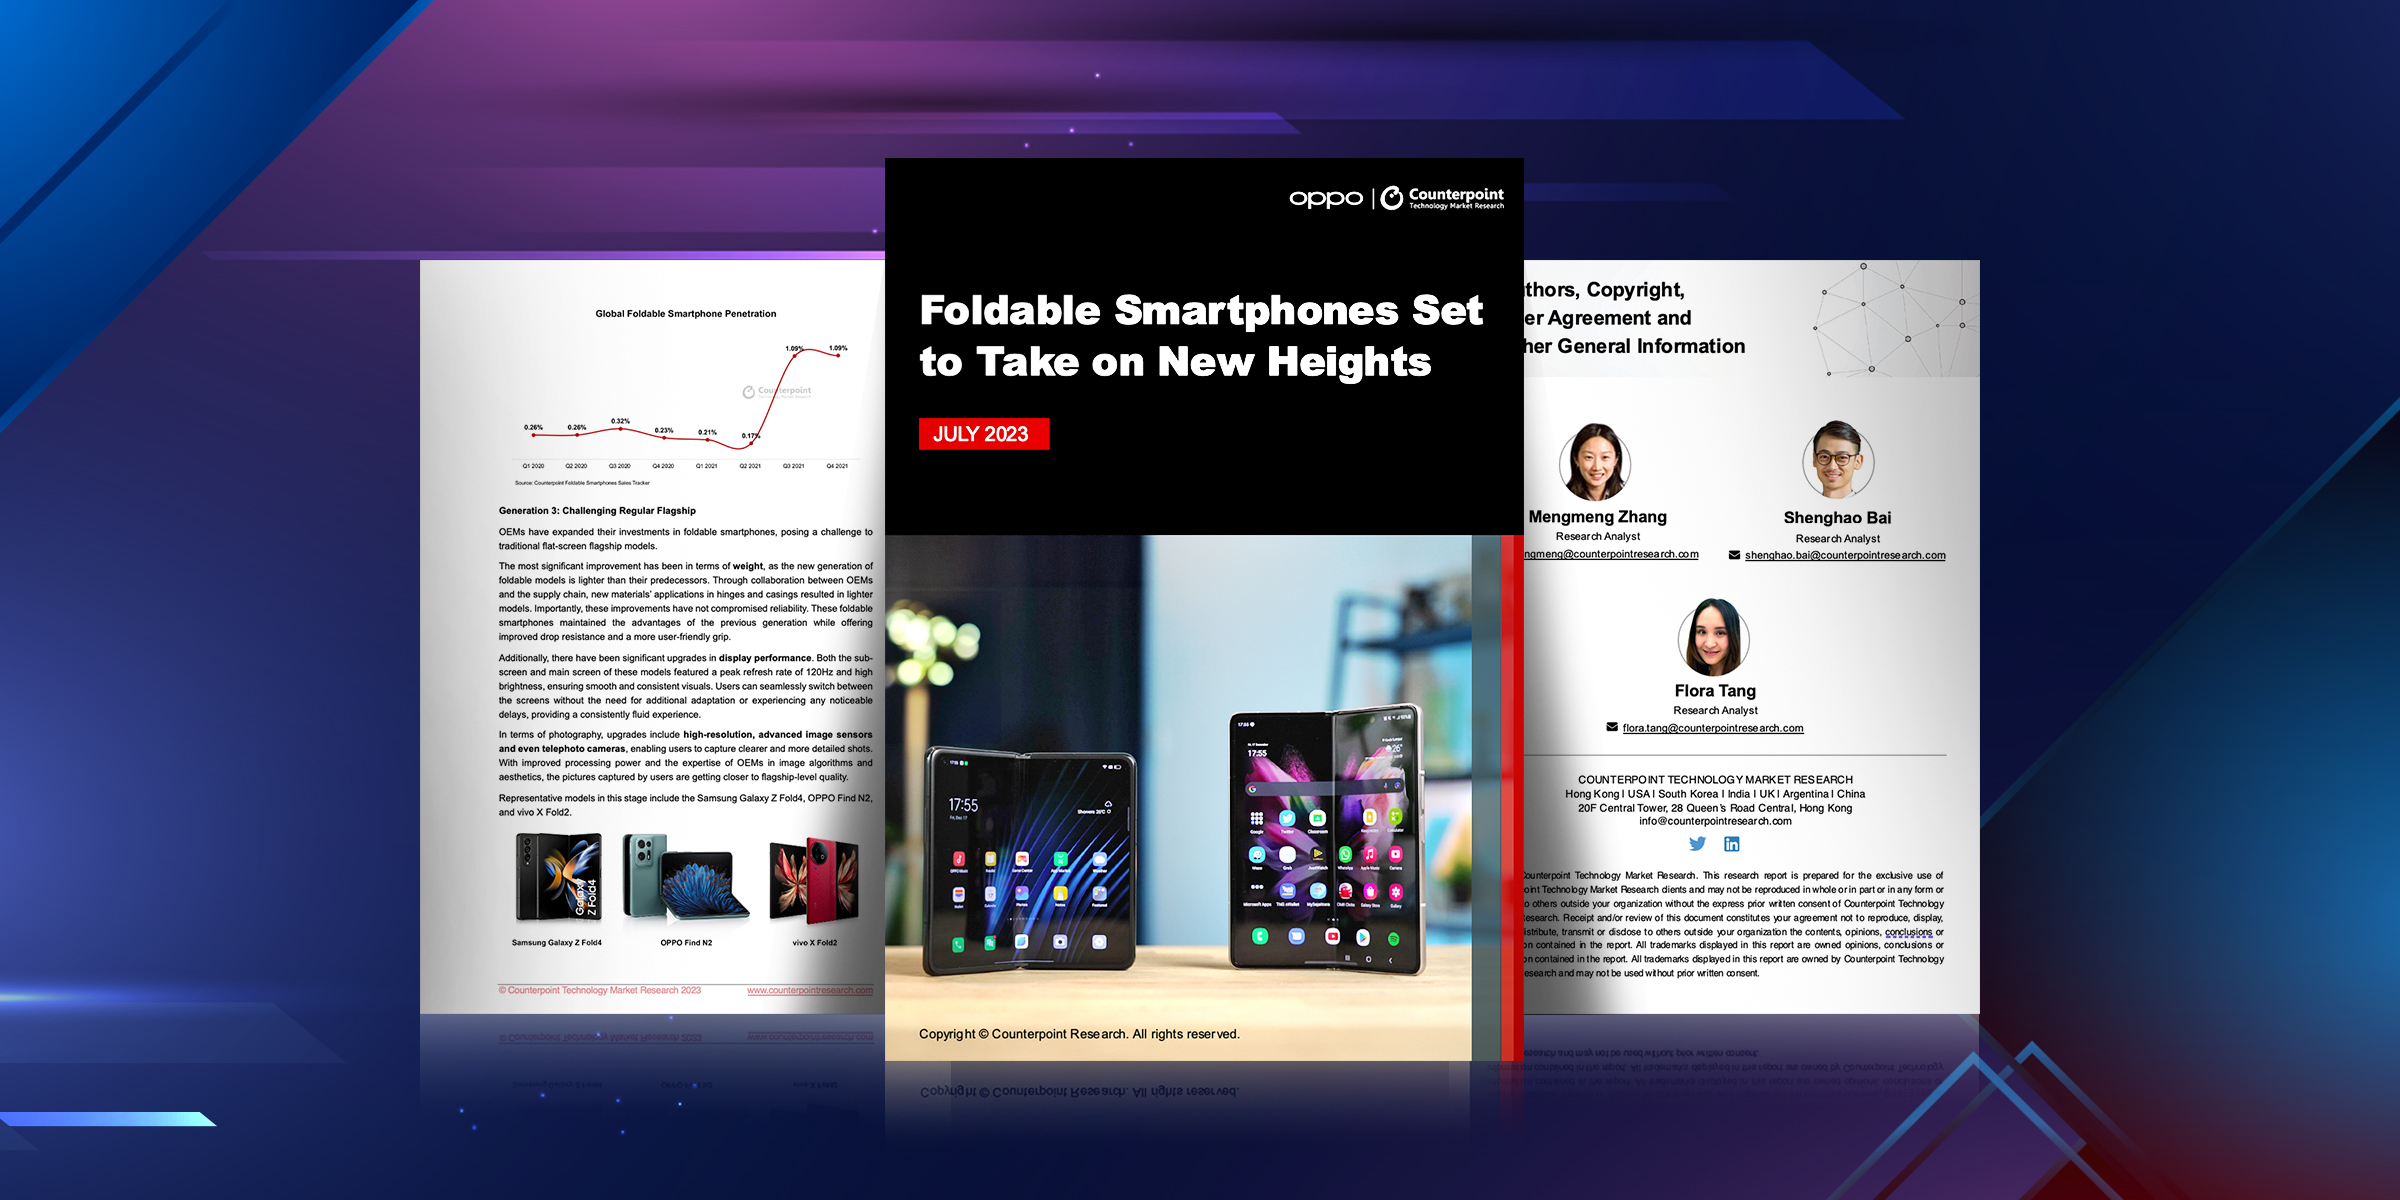 White Paper: Foldable Smartphones Set to Take on New Heights